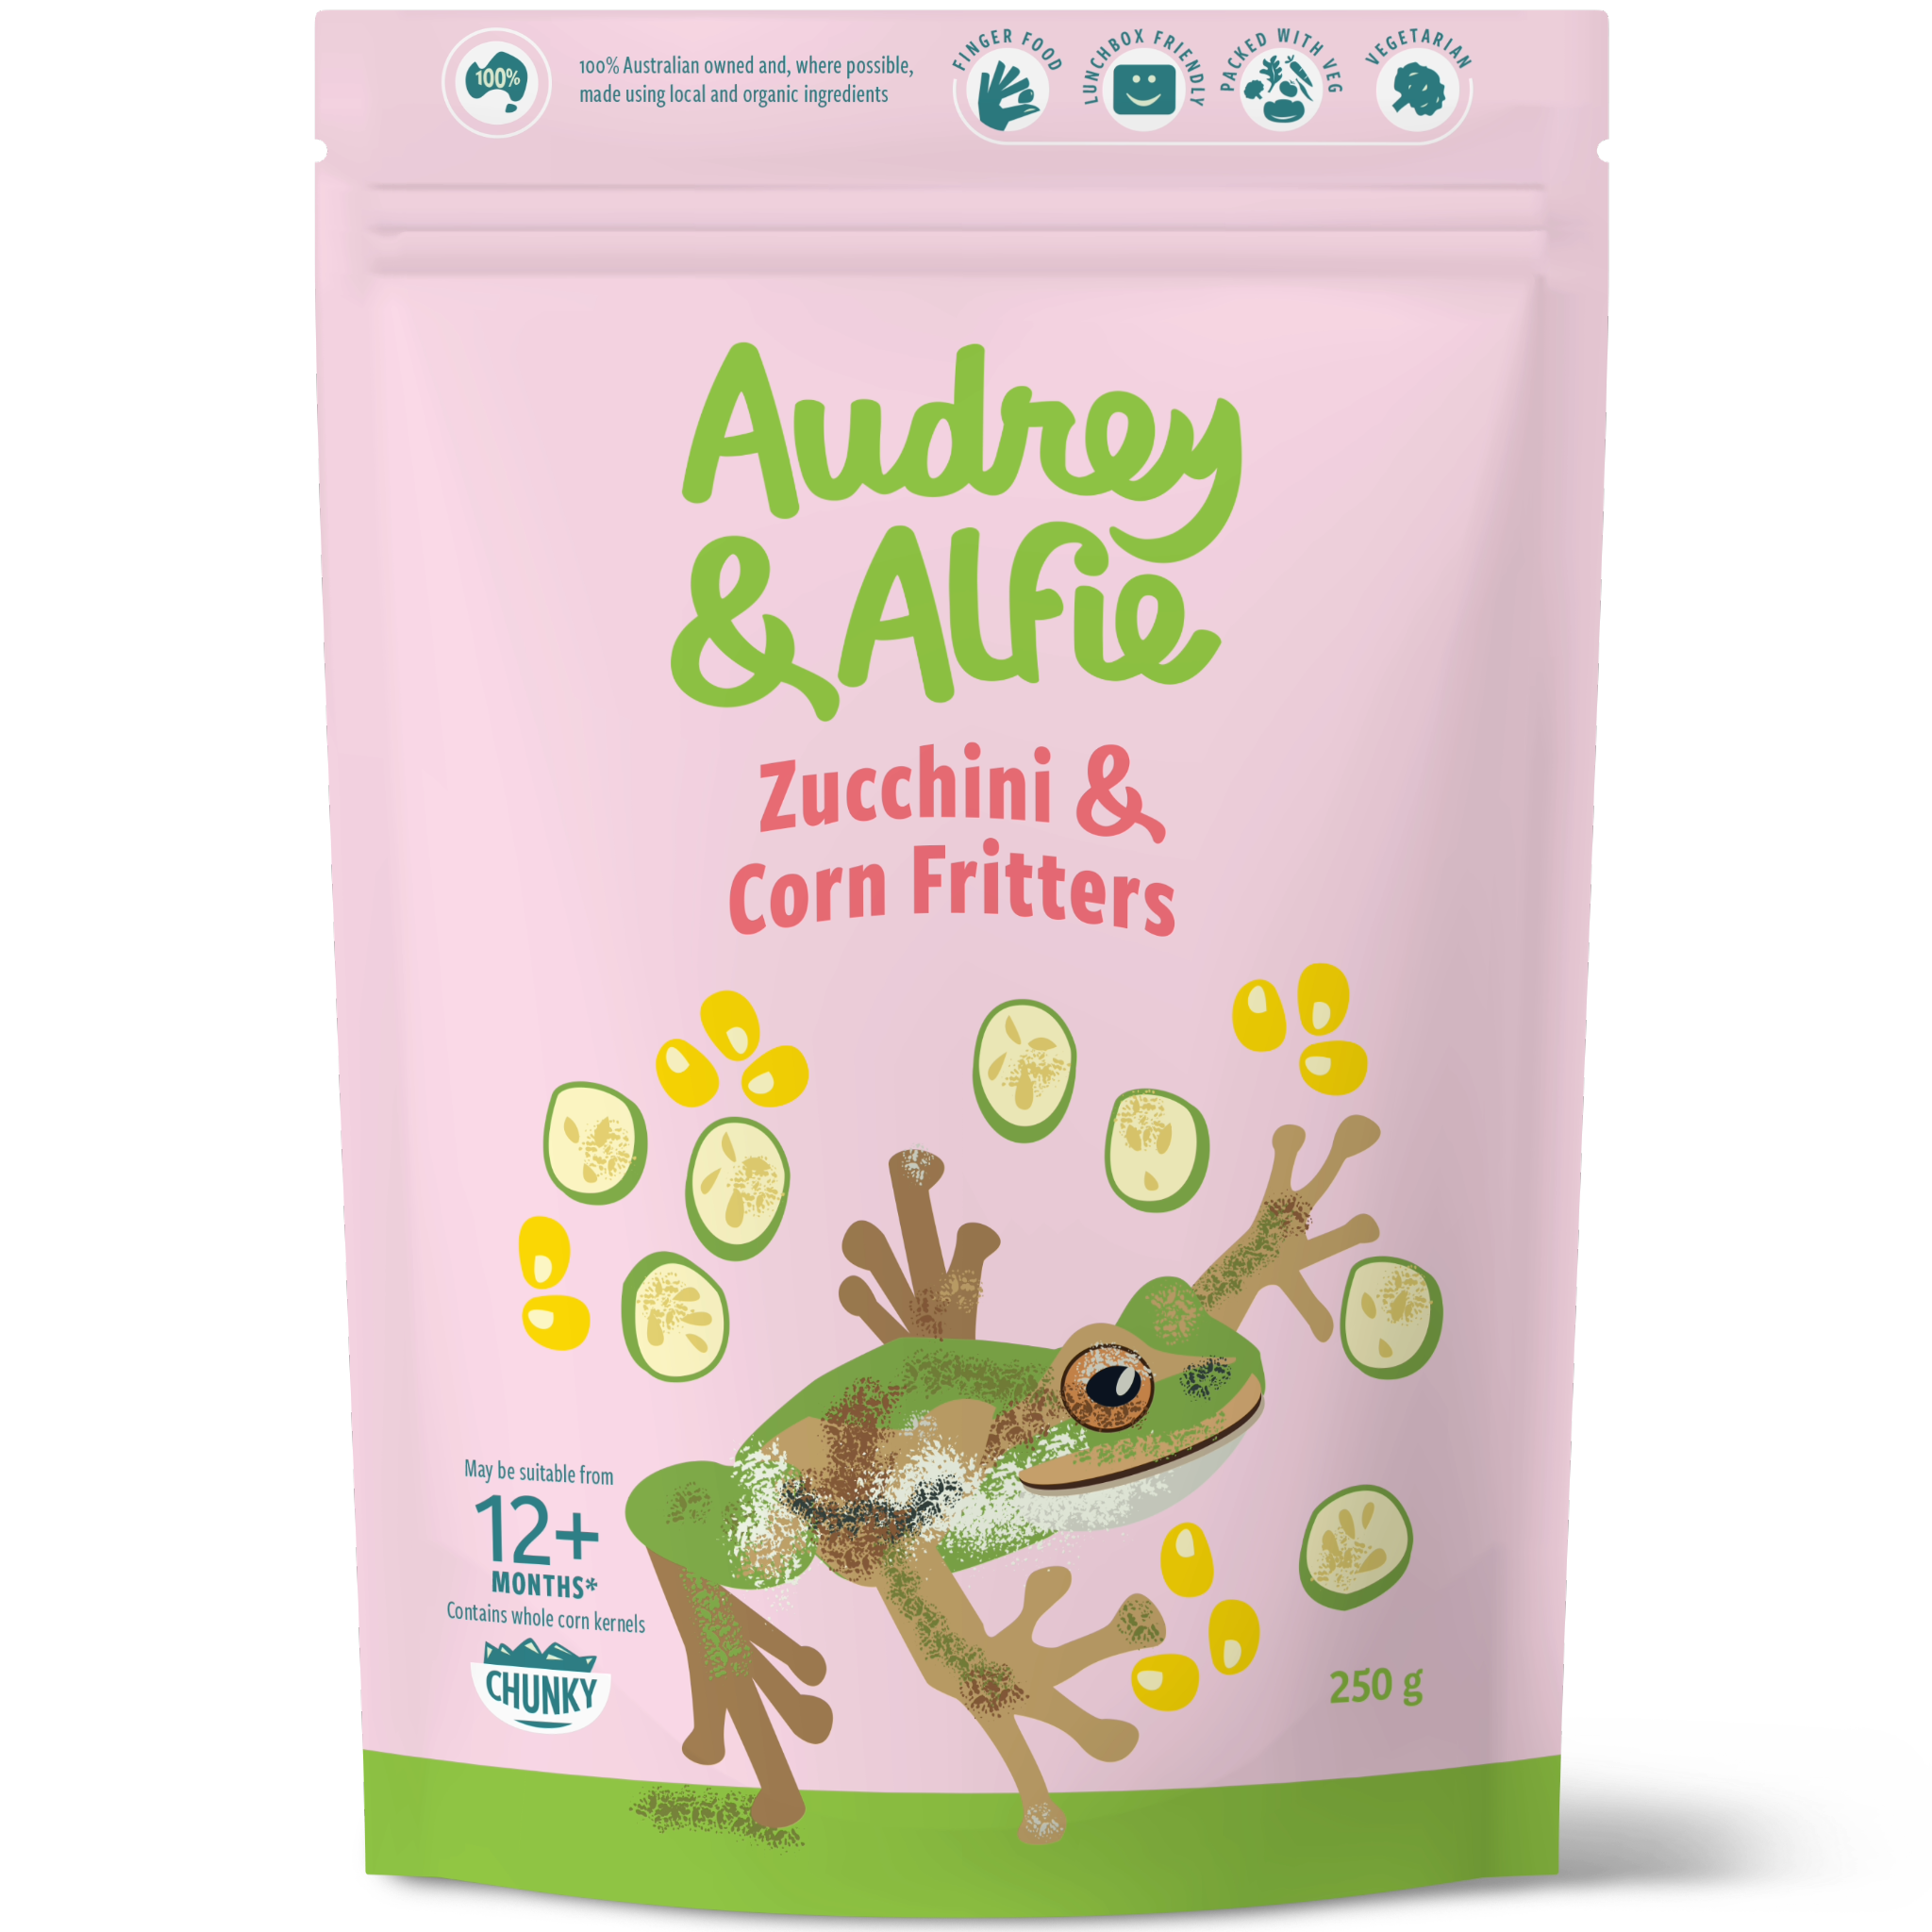 A Packet of Zucchini & Corn Fritters from Audrey & Alfie's Finger Food Range